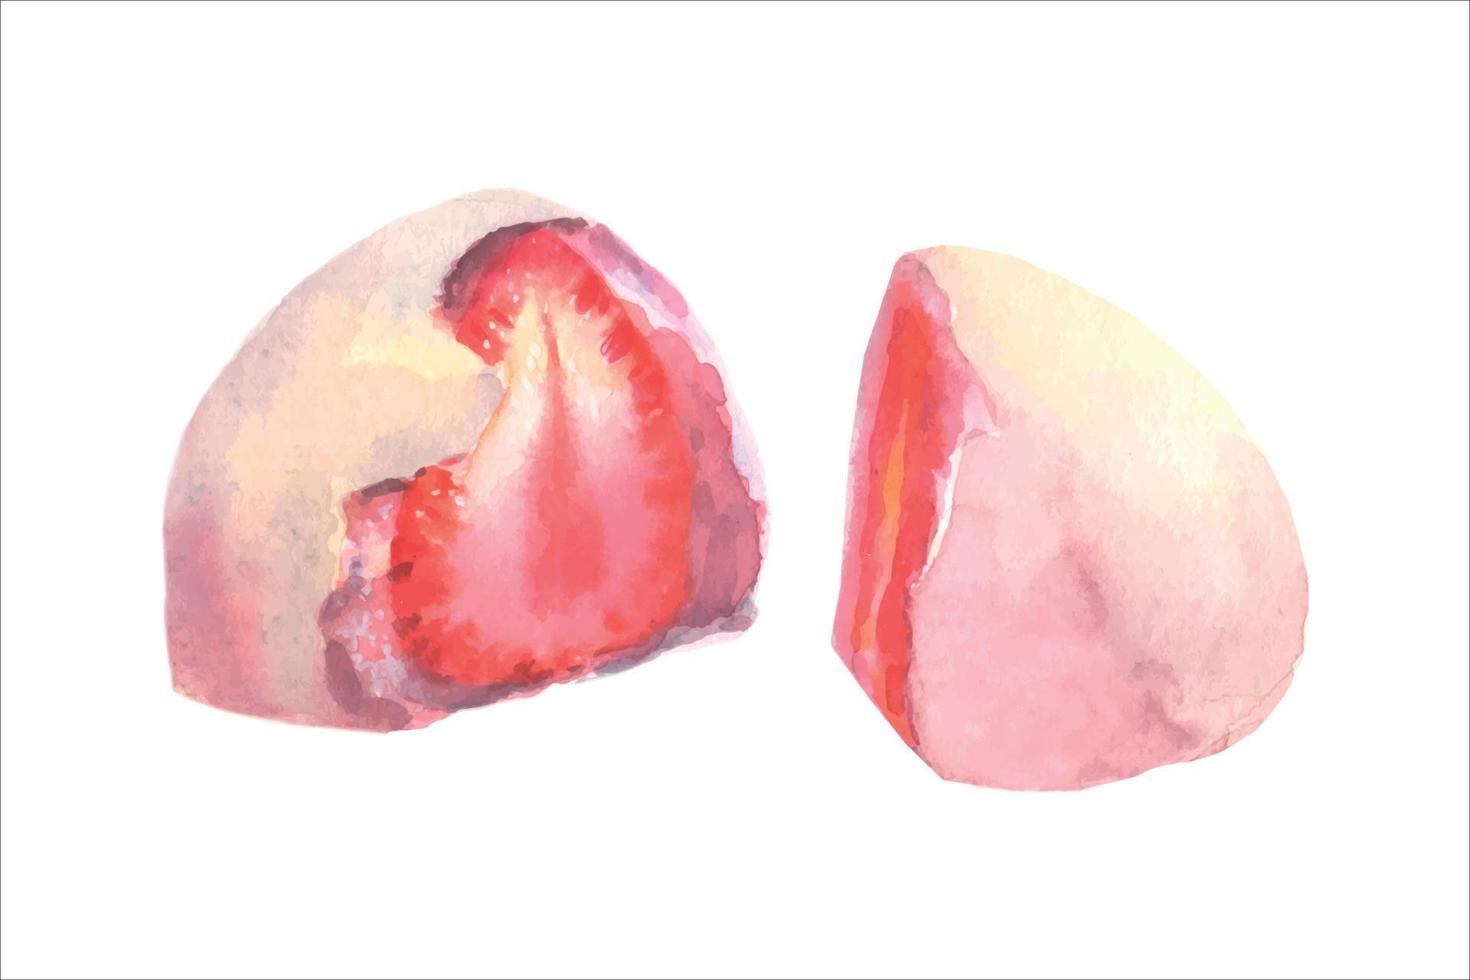 Japanese famous traditional strawberry daifuku, watercolor illustration on white background. Asian food. vector